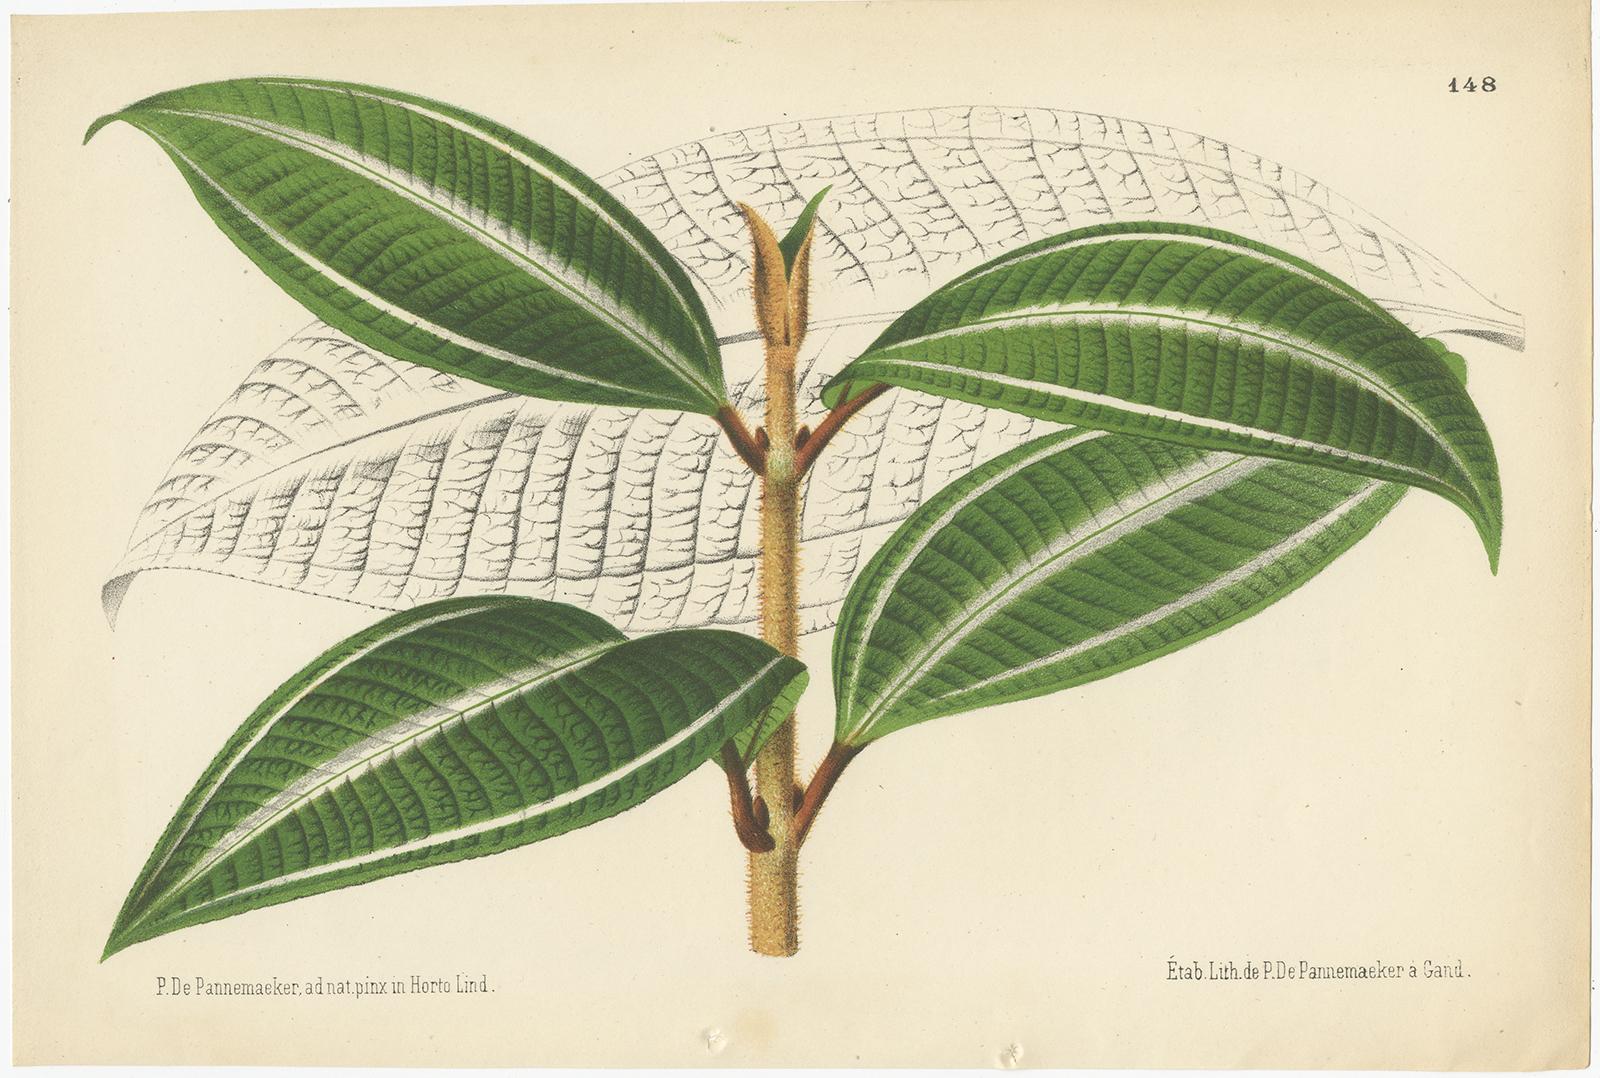 Set of two antique botany prints titled 'Miconia Pulverulenta - Calathea (Maranta) Nigro-Costata'. It depicts a species of the miconia plant and a species of the calathea plant. These prints originate from volume 20 of 'L'Illustration Horticole',